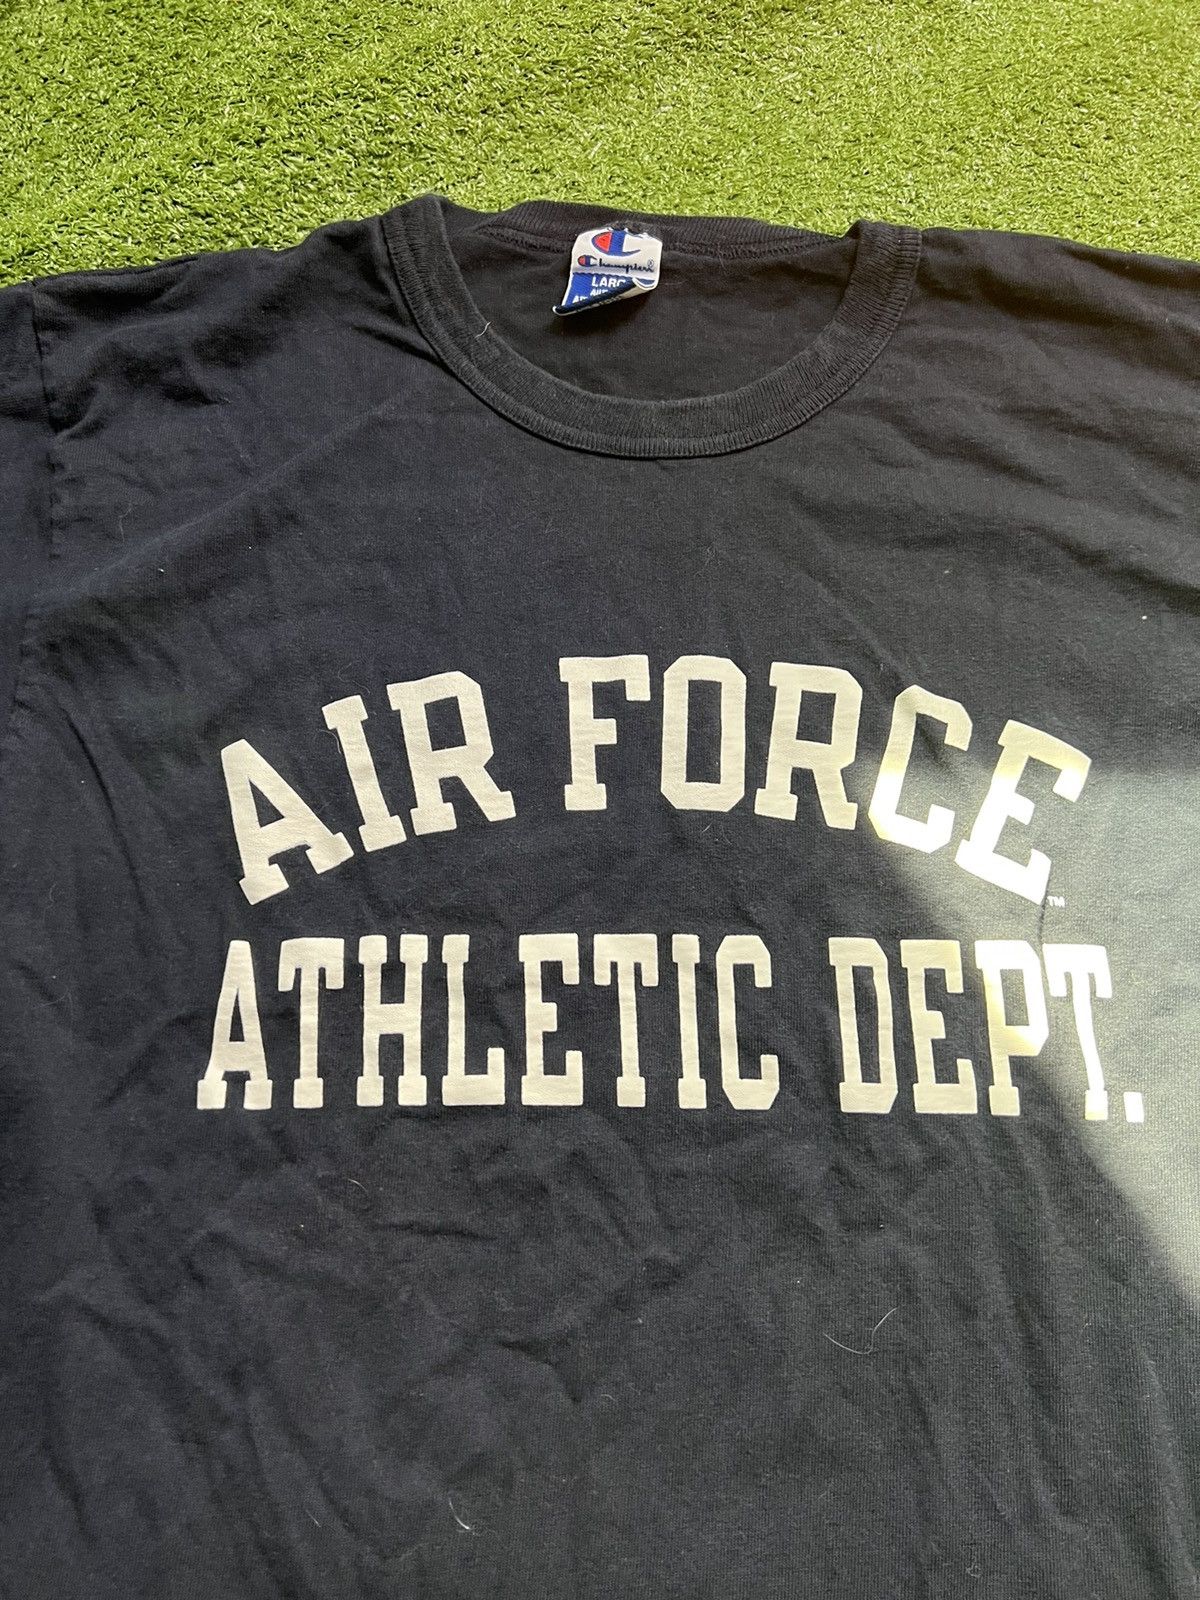 Vintage vintage air force athletic dept champion made in usa shirt Size US L / EU 52-54 / 3 - 2 Preview